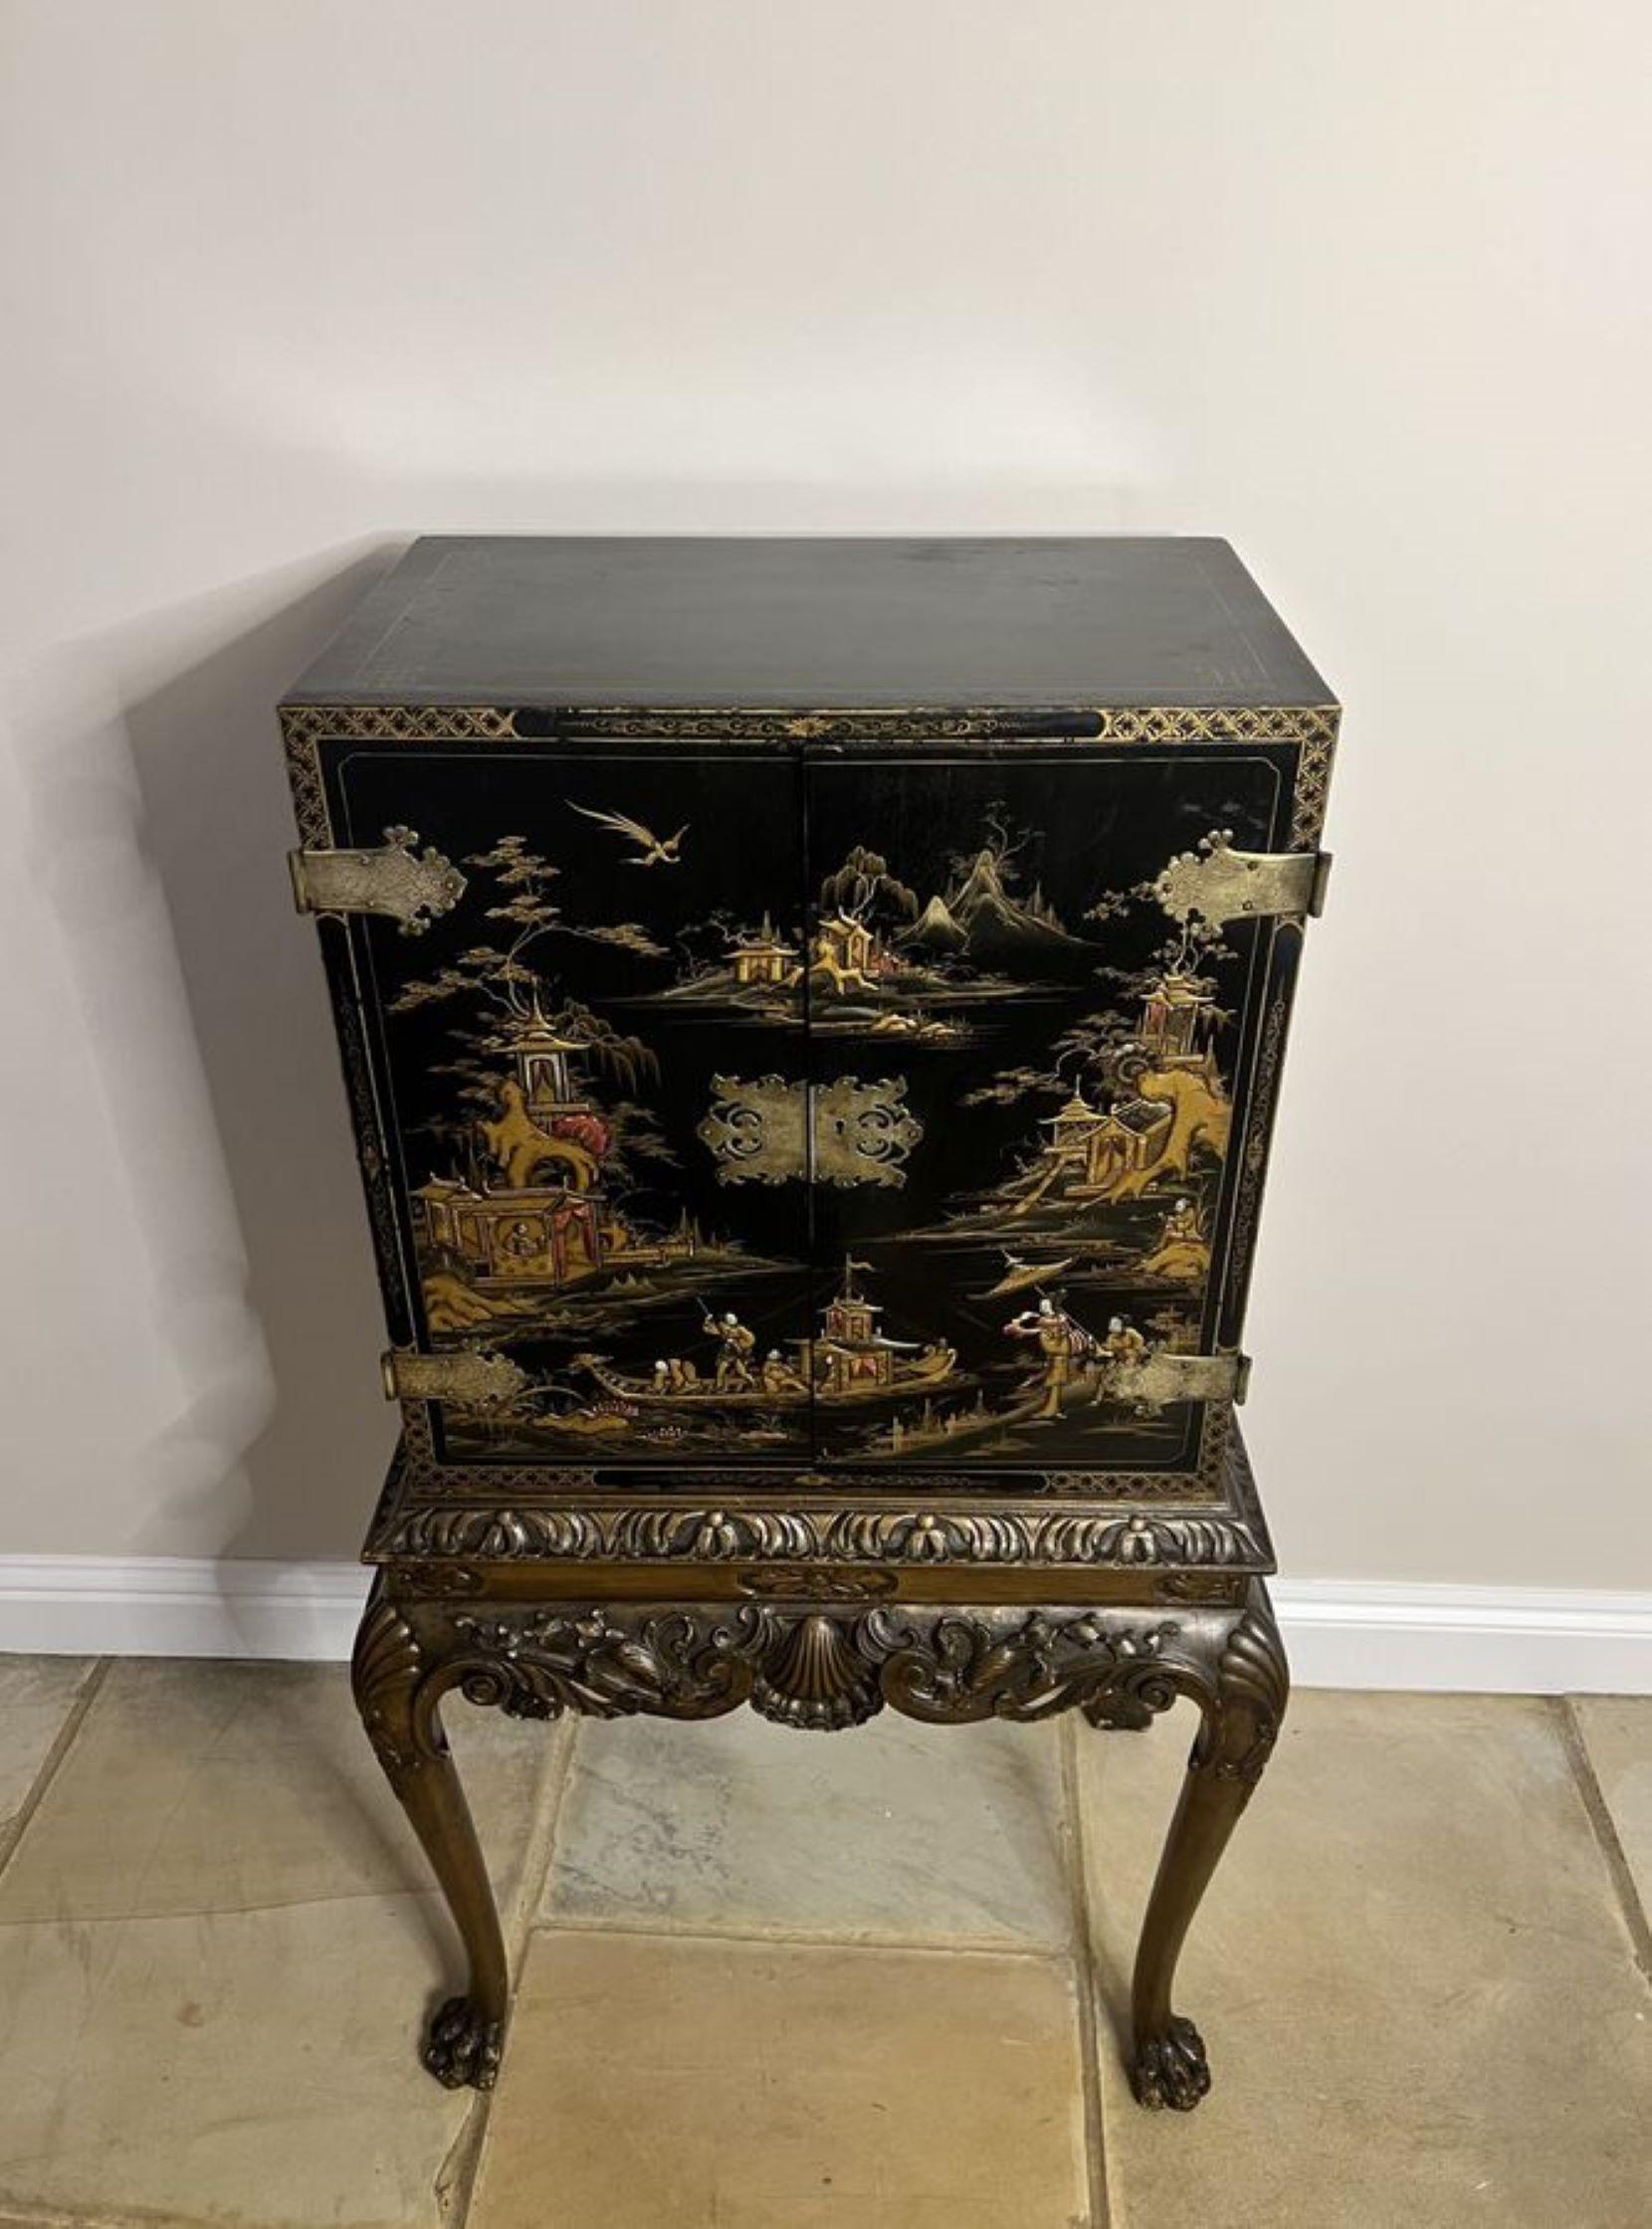 Wood Outstanding quality antique Edwardian chinoiserie decorated cabinet on a stand